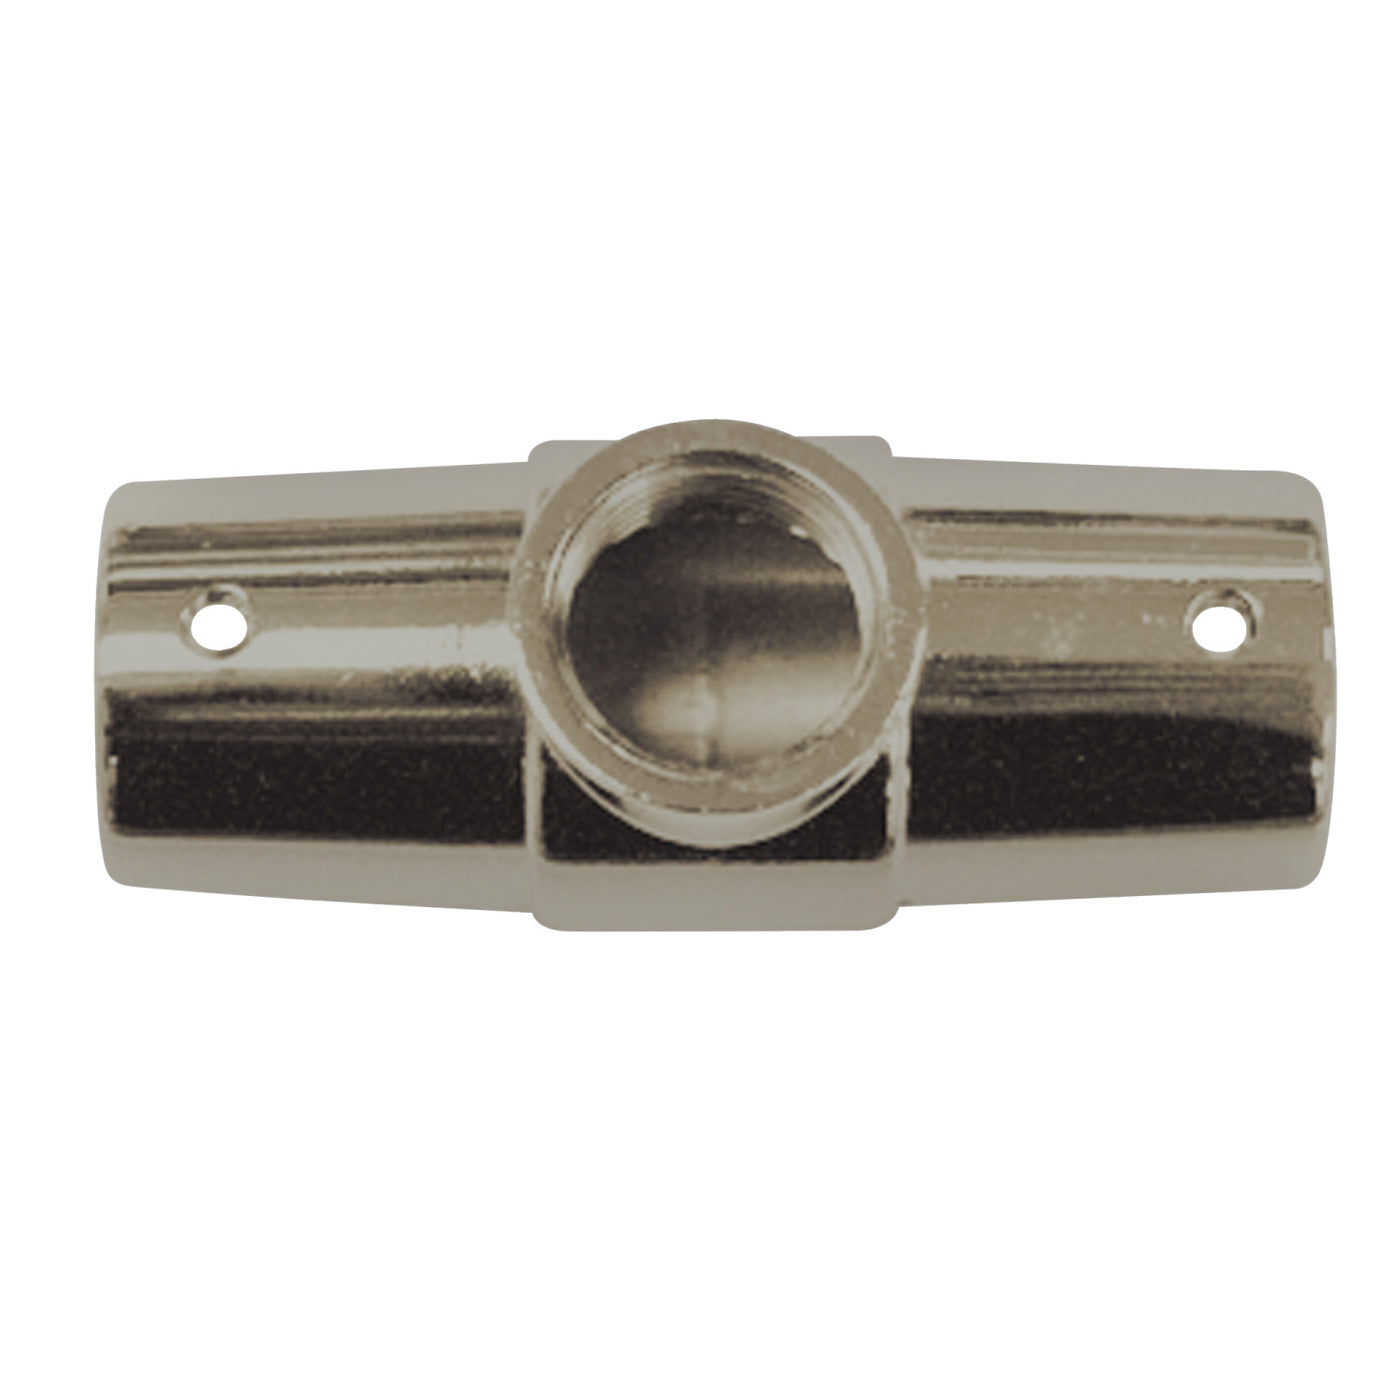 Elements of Design EDRCA8 Shower Ring Connector 3 Holes, Brushed Nickel